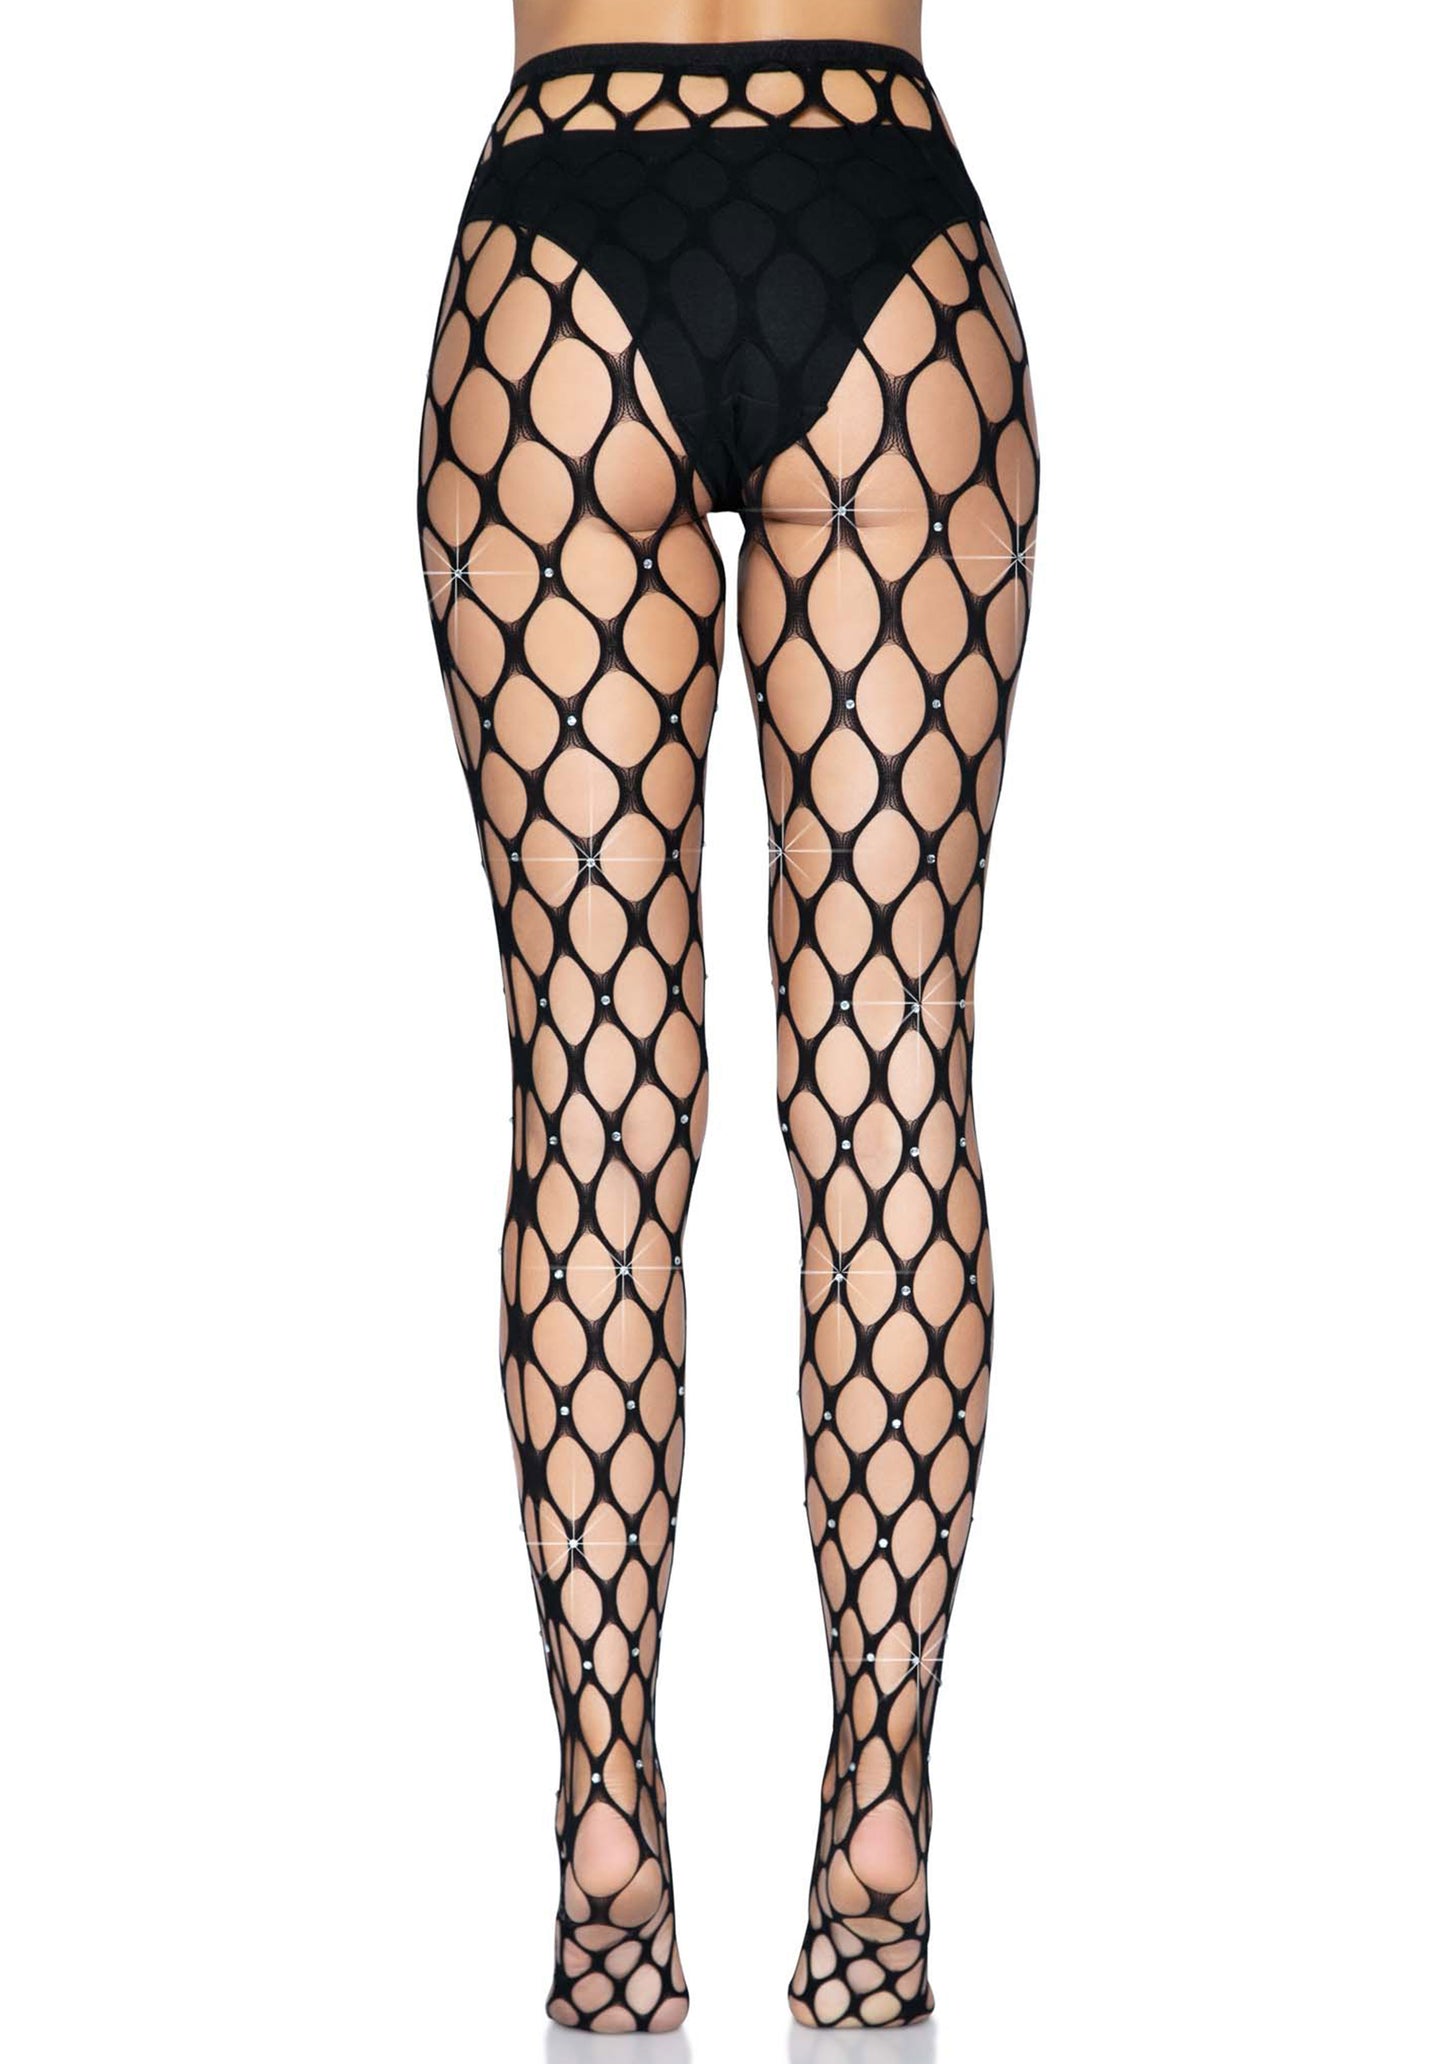 Leg Avenue 9713 Rhinestone Net Tights - Black thick pothole fishnet tights with sparkly diamant̩ jewels dotted all over.